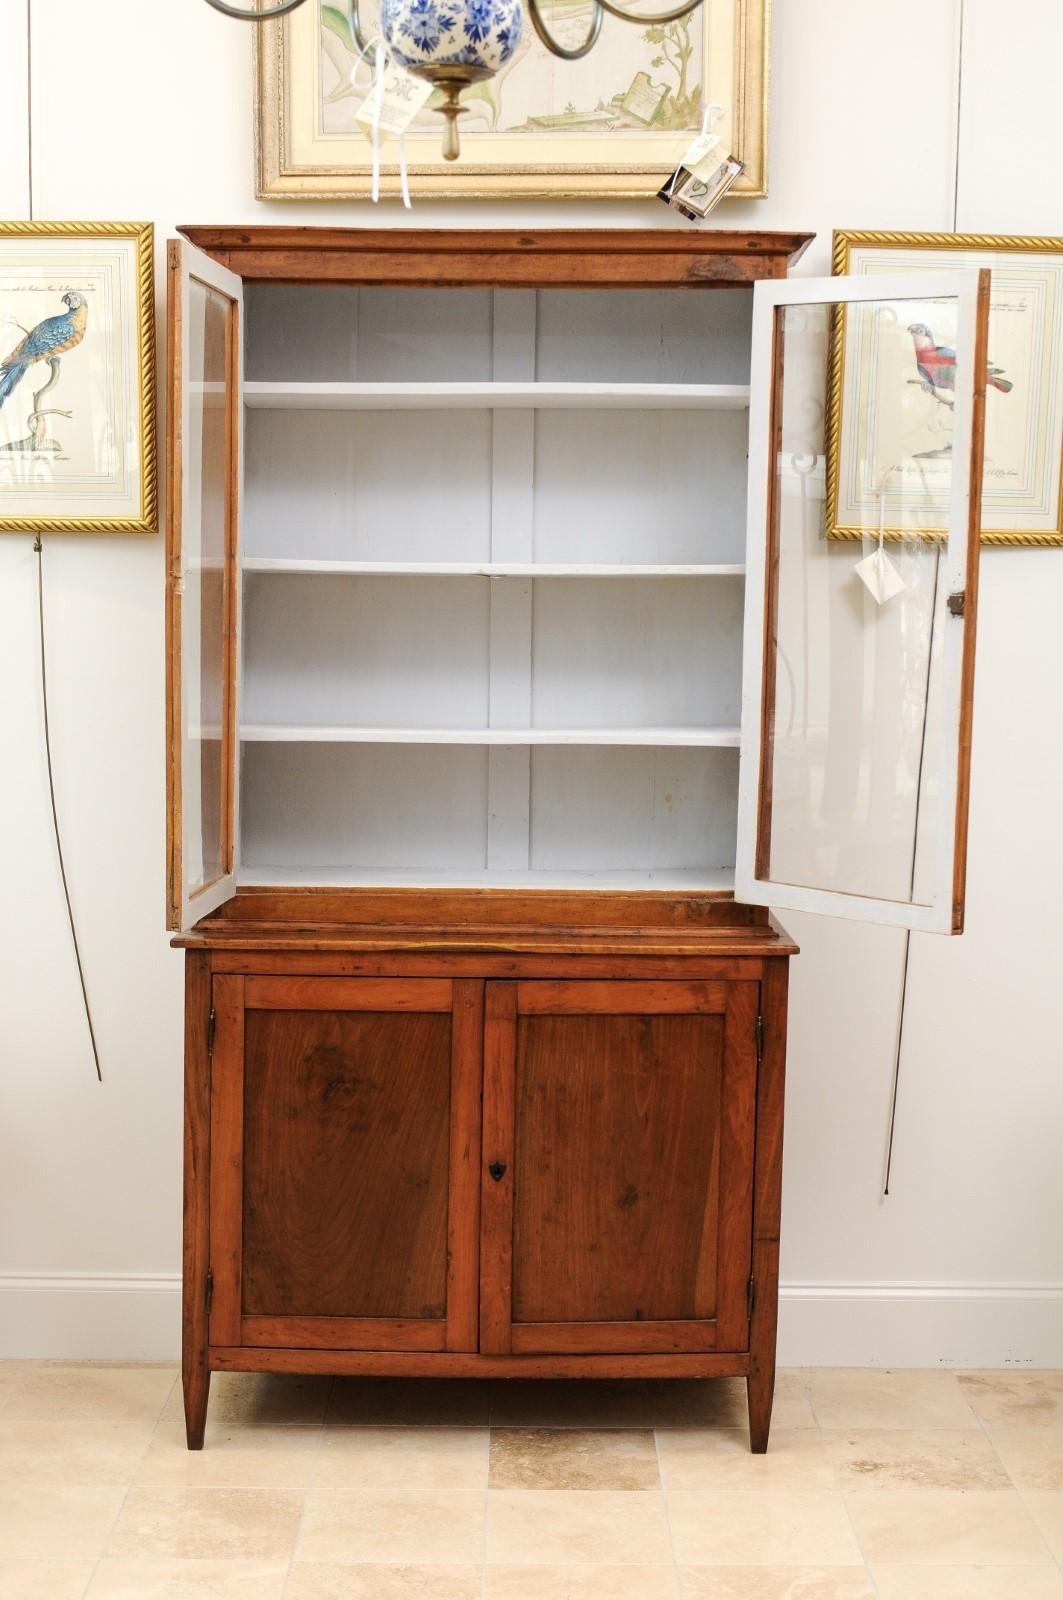 A late 18th century Italian neoclassical fruitwood bookcase featuring glass paneled doors over 2 cabinet doors on tapered feet.

   